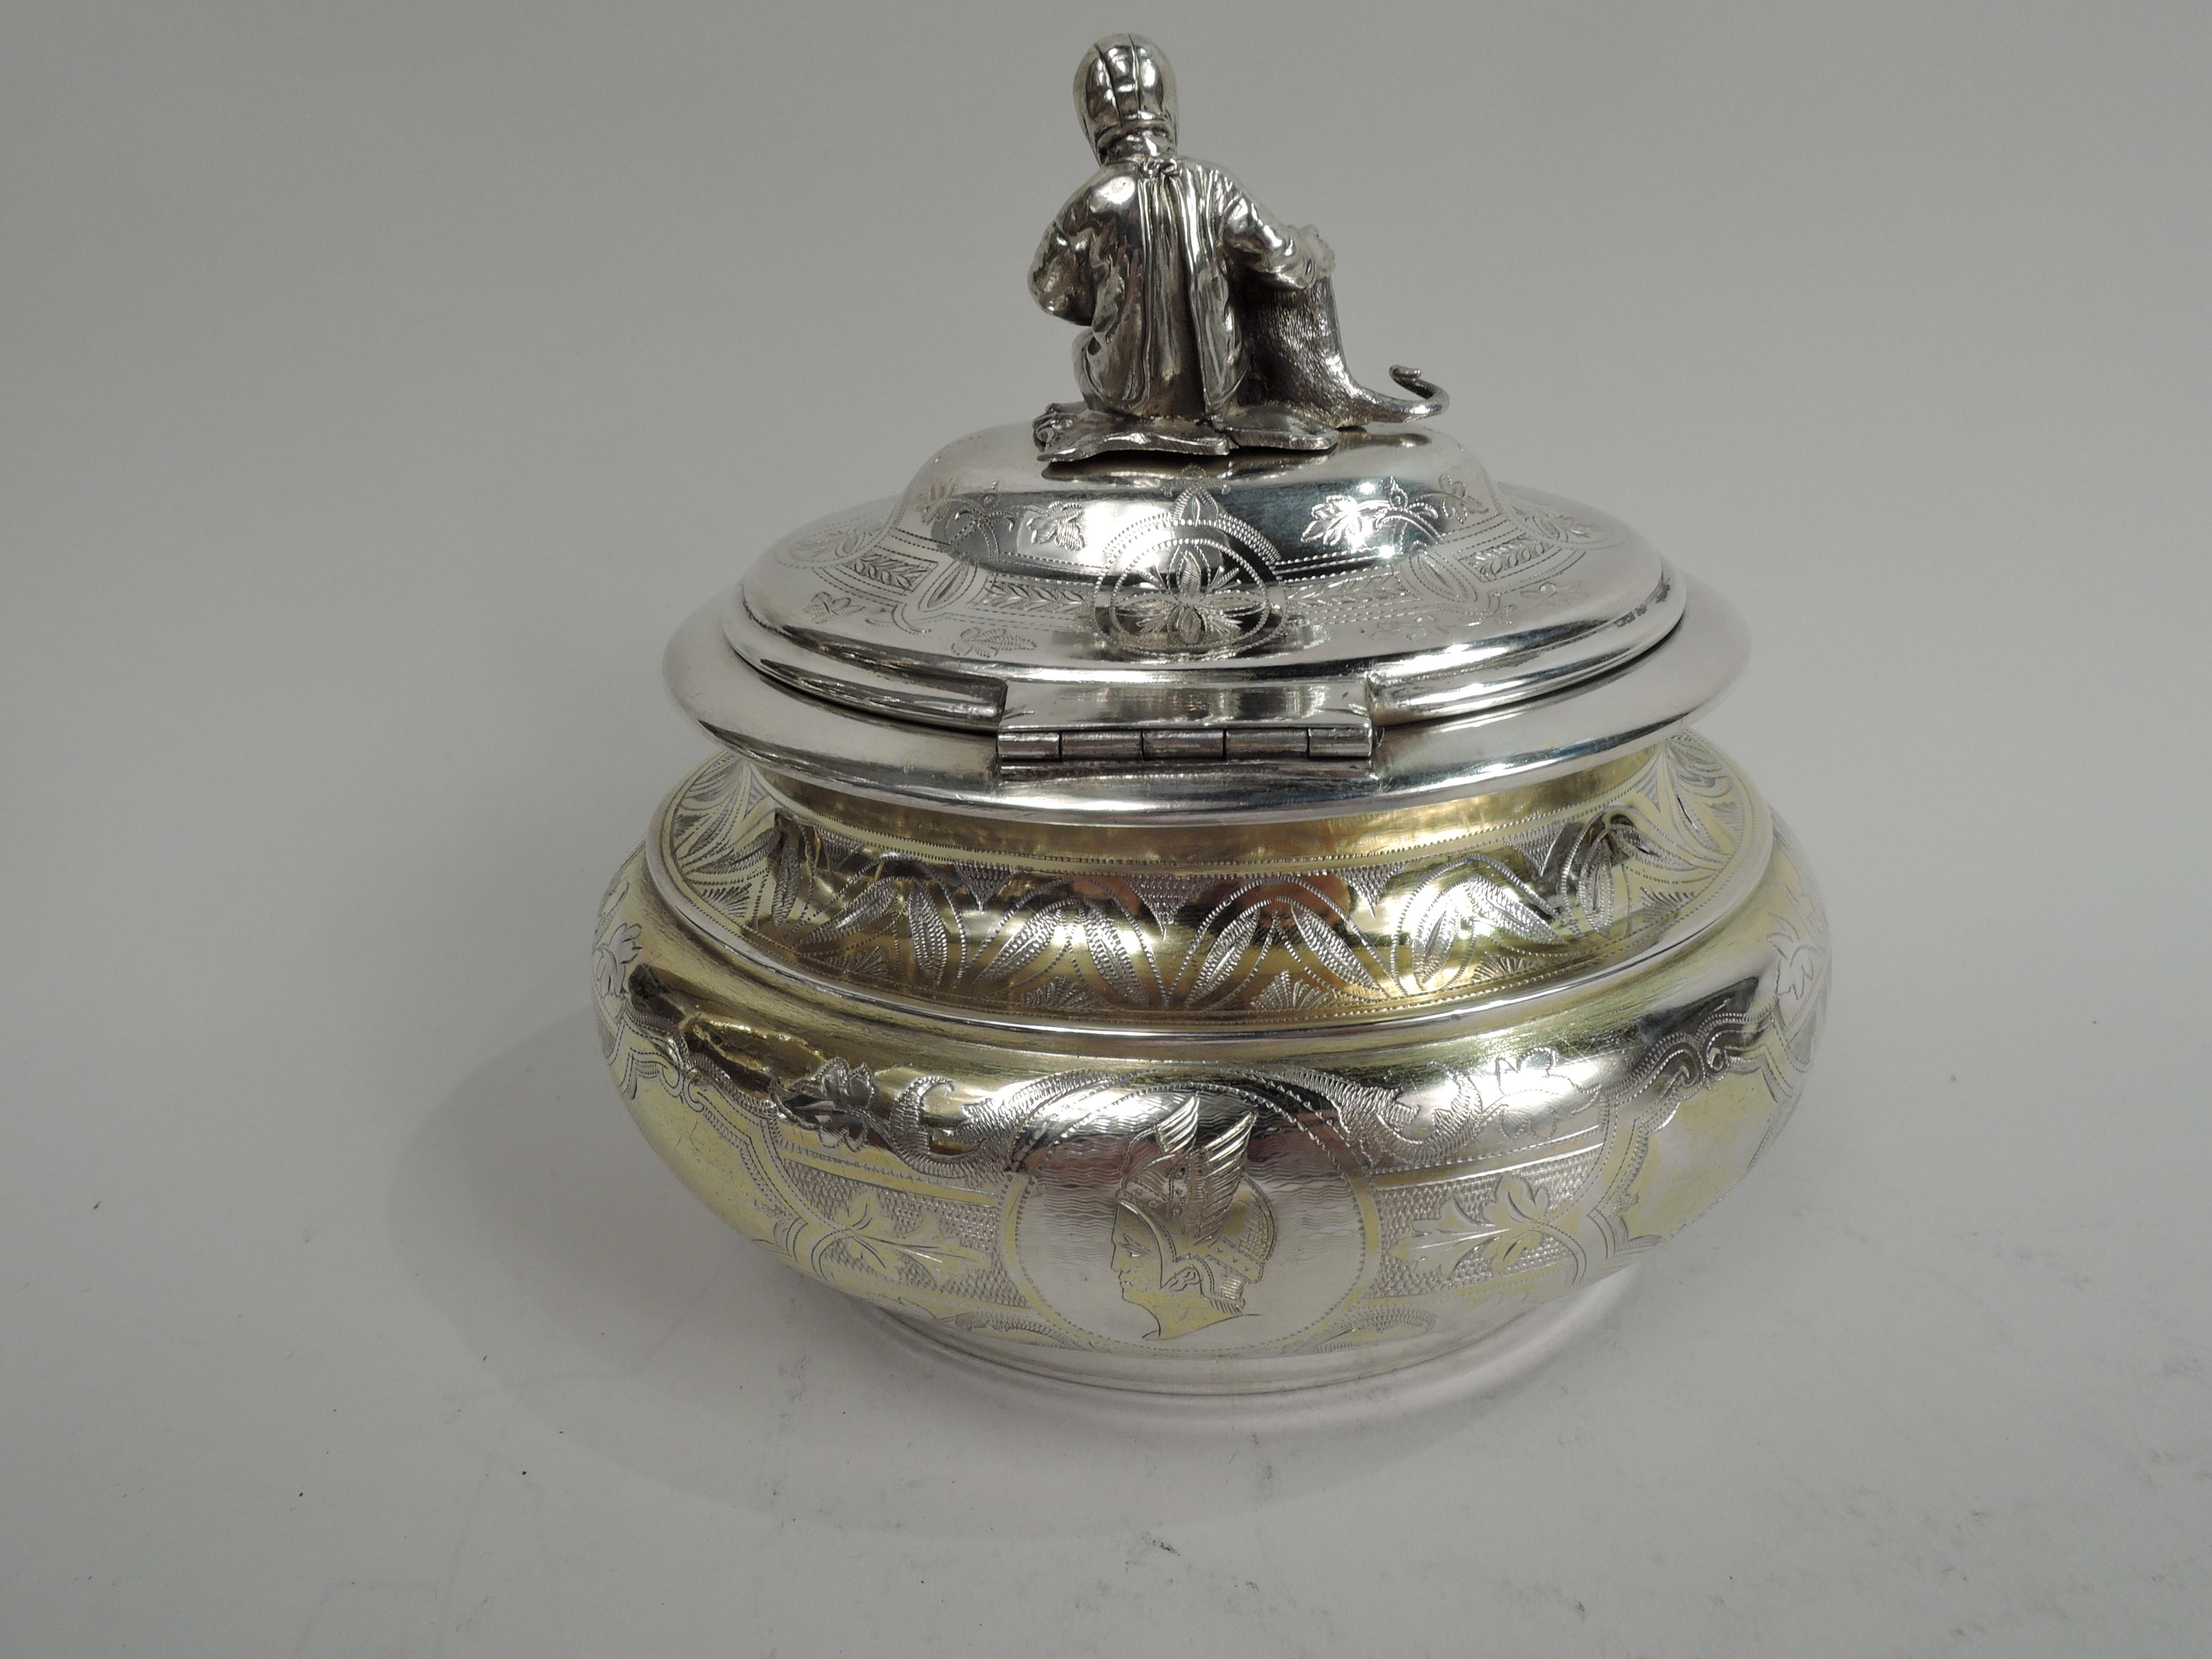 Neoclassical Revival Austrian Classical Medallion Box with Sweet & Sentimental Finial For Sale